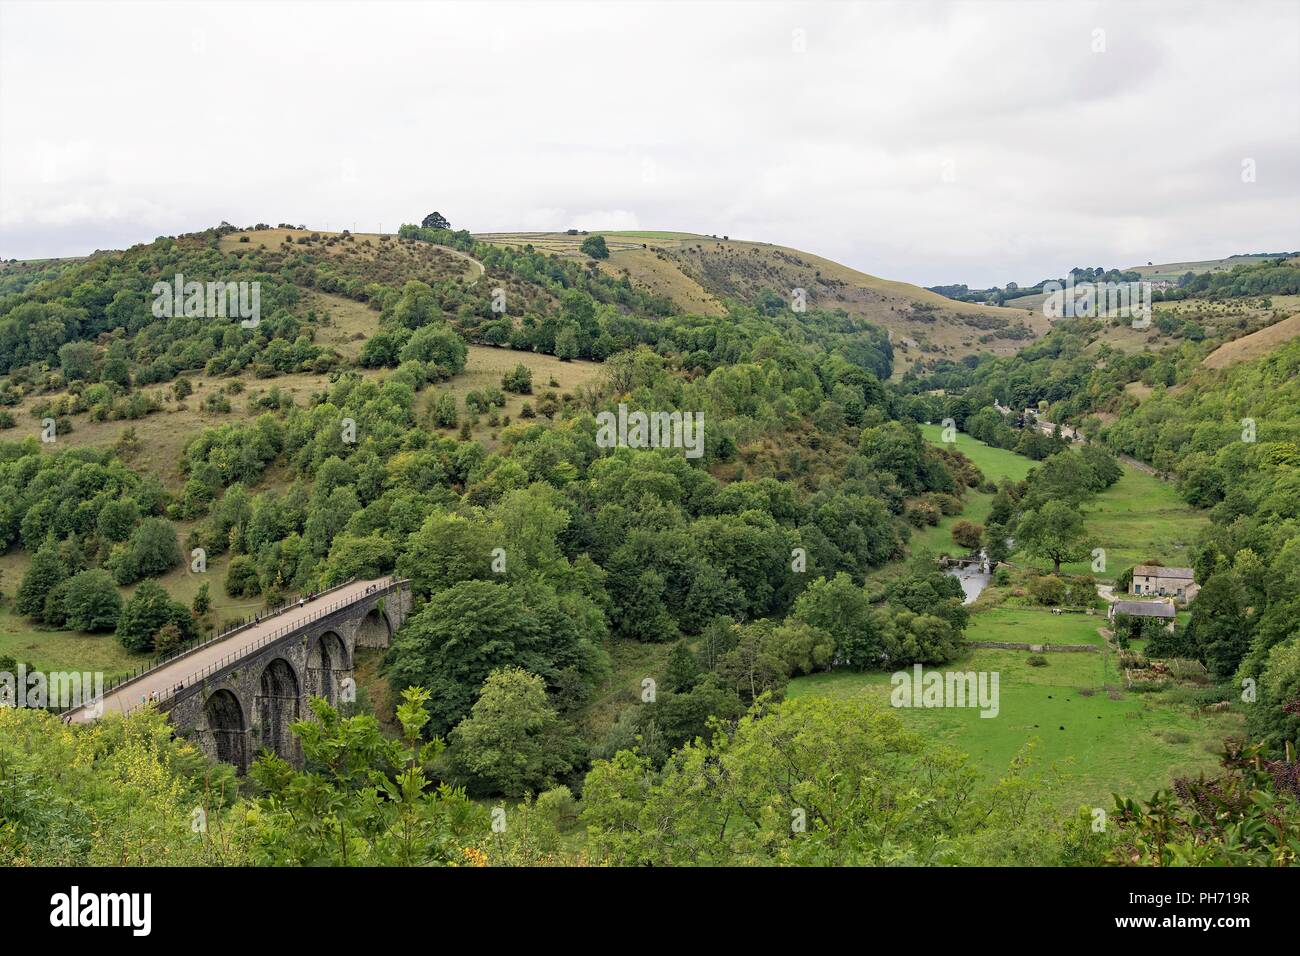 Taken to capture the rich and fertile diversity of the Monsal trail, in the Peak District in Derbyshire. Stock Photo